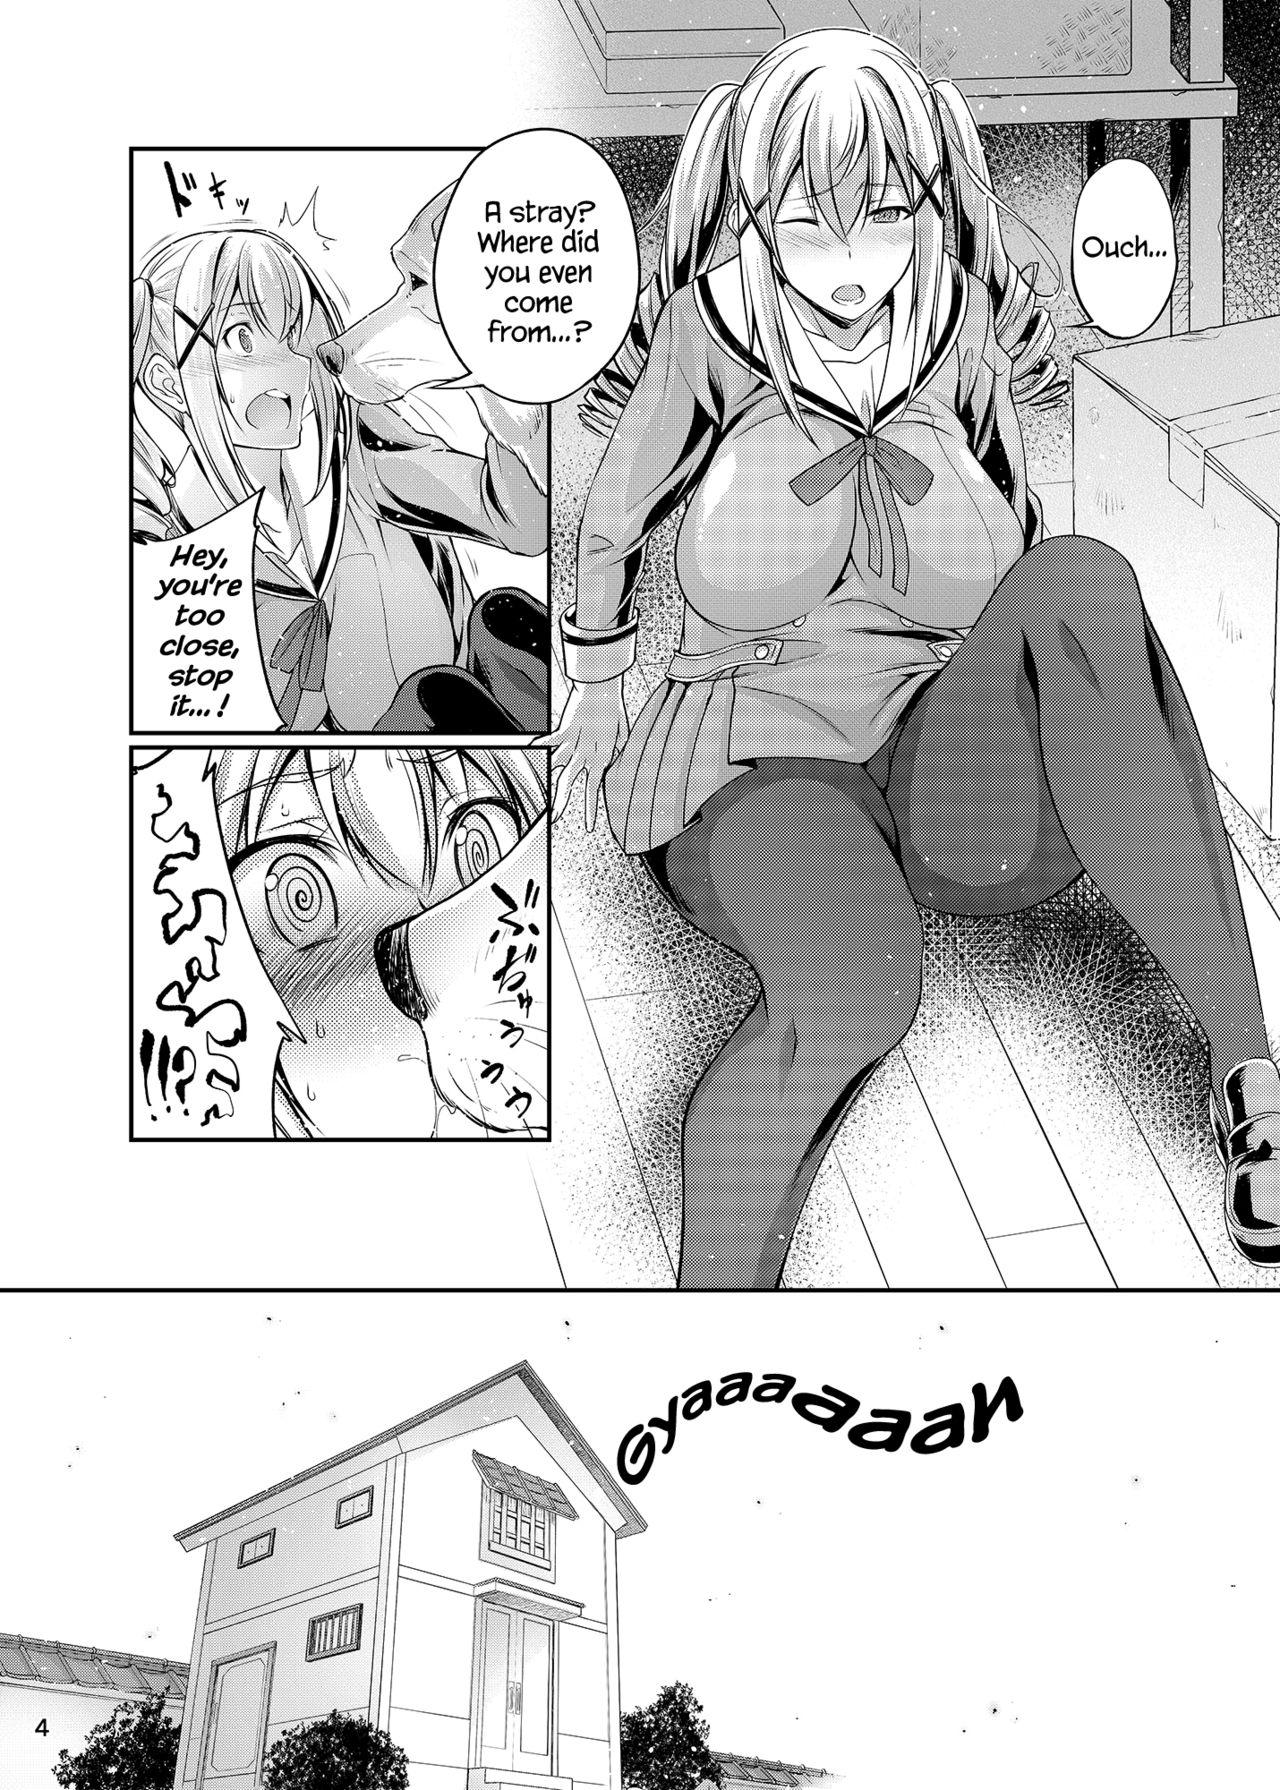 Colombia Koubi Shichatta - Bang dream Shaved - Page 4